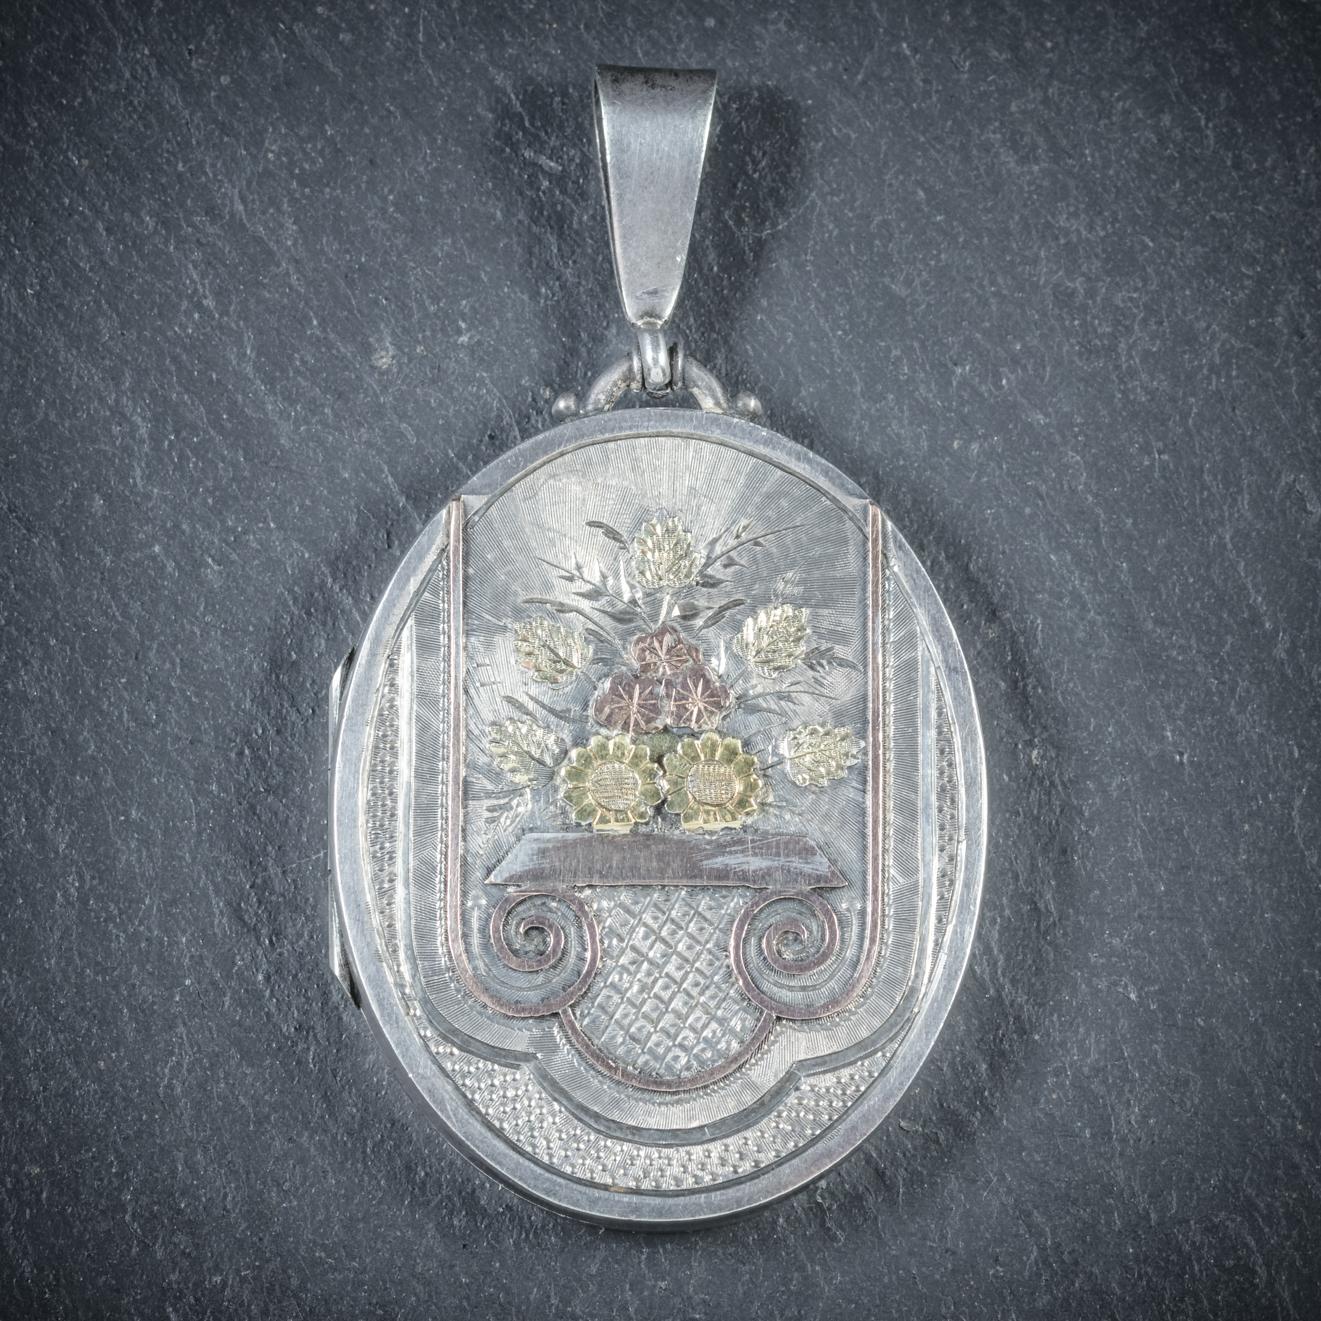 This beautiful antique Victorian Sterling Silver locket displays a beautiful engraved bouquet of flowers and leaves on the front which are set in 18ct Yellow Gold and Rose Gold

The Locket opens and closes securely and fitted with Silver rims